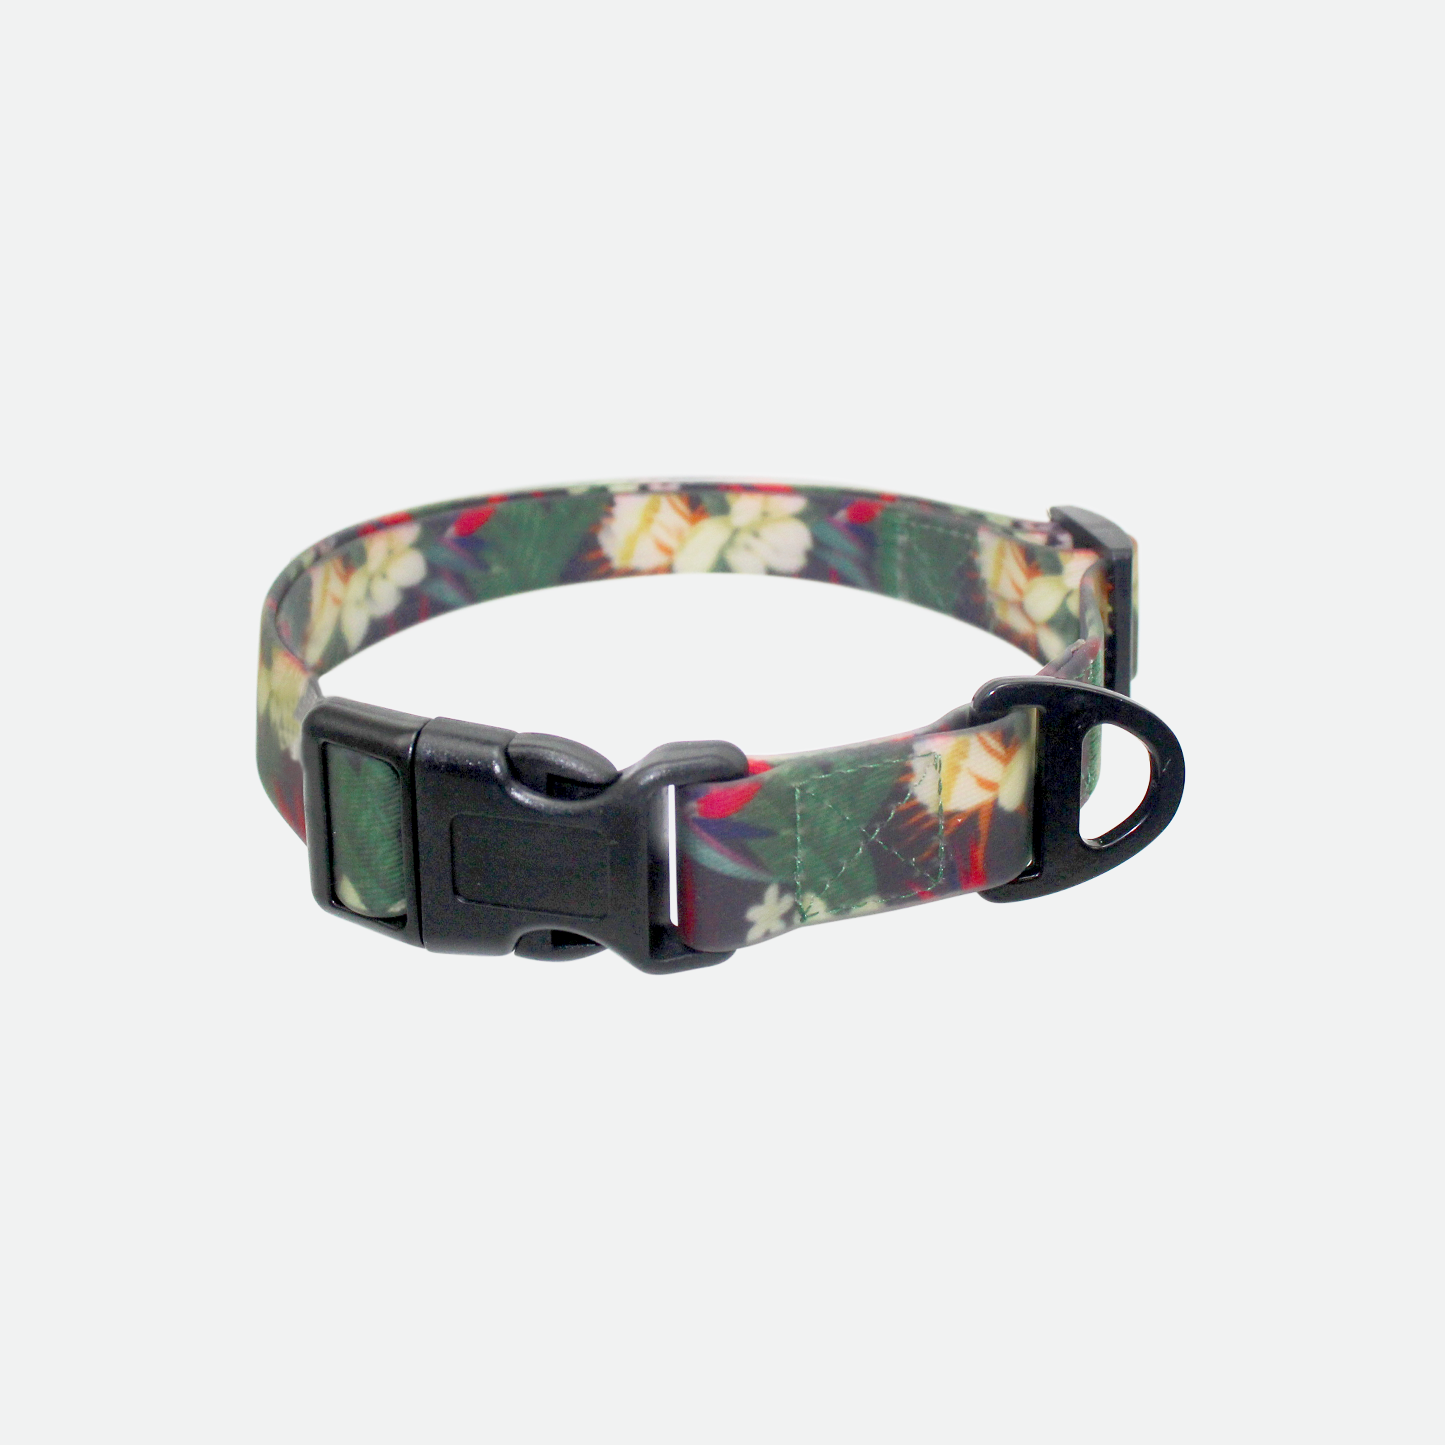 Silicone collar for dog, birds of paradise style